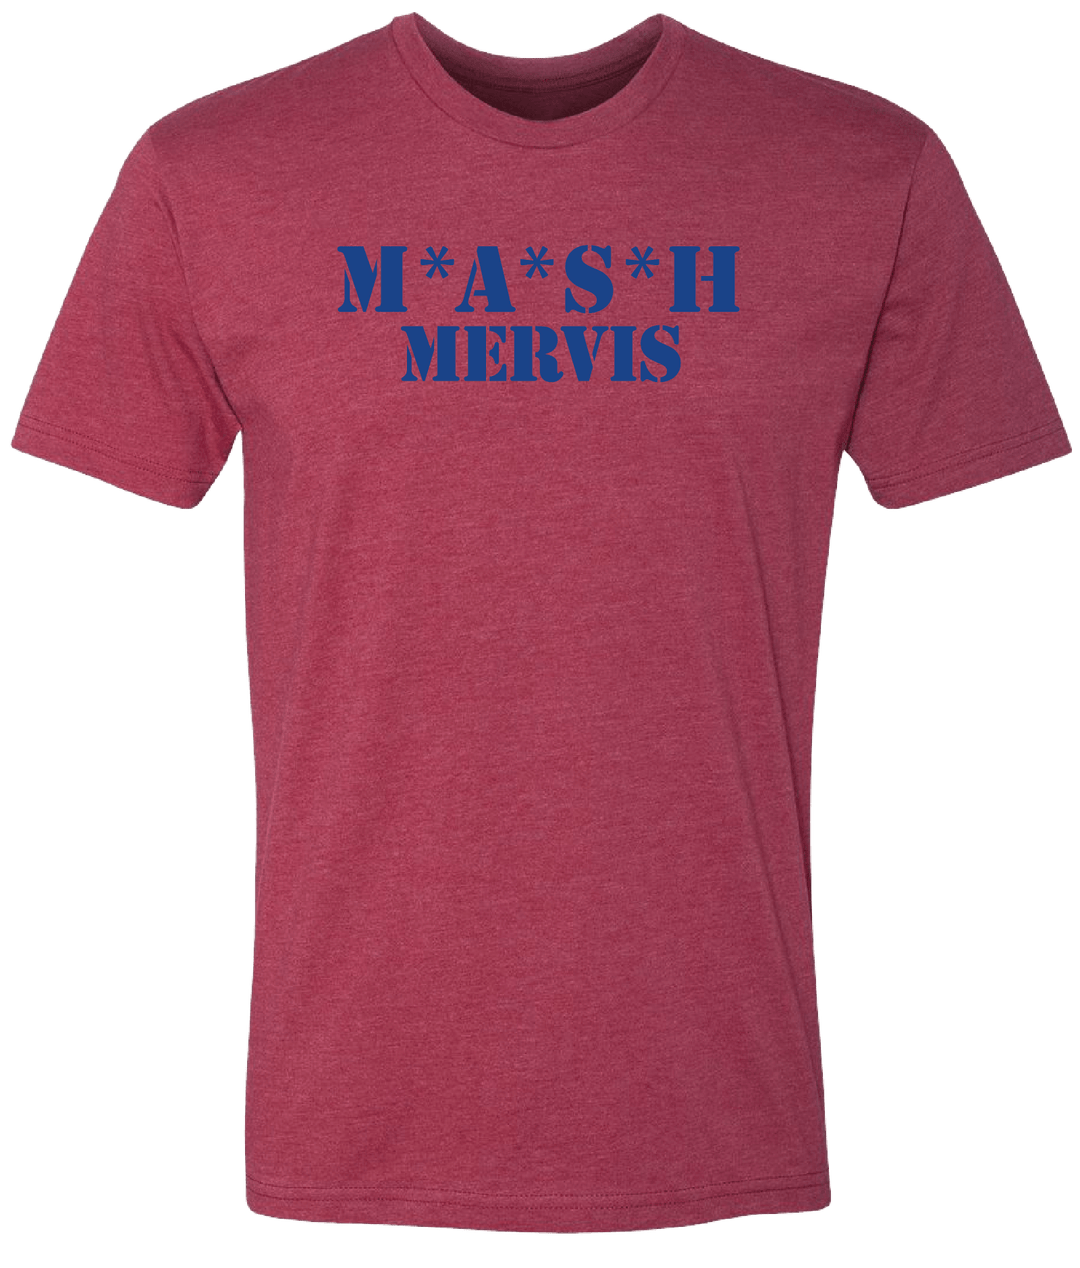 MASH MERVIS. (RED) - OBVIOUS SHIRTS